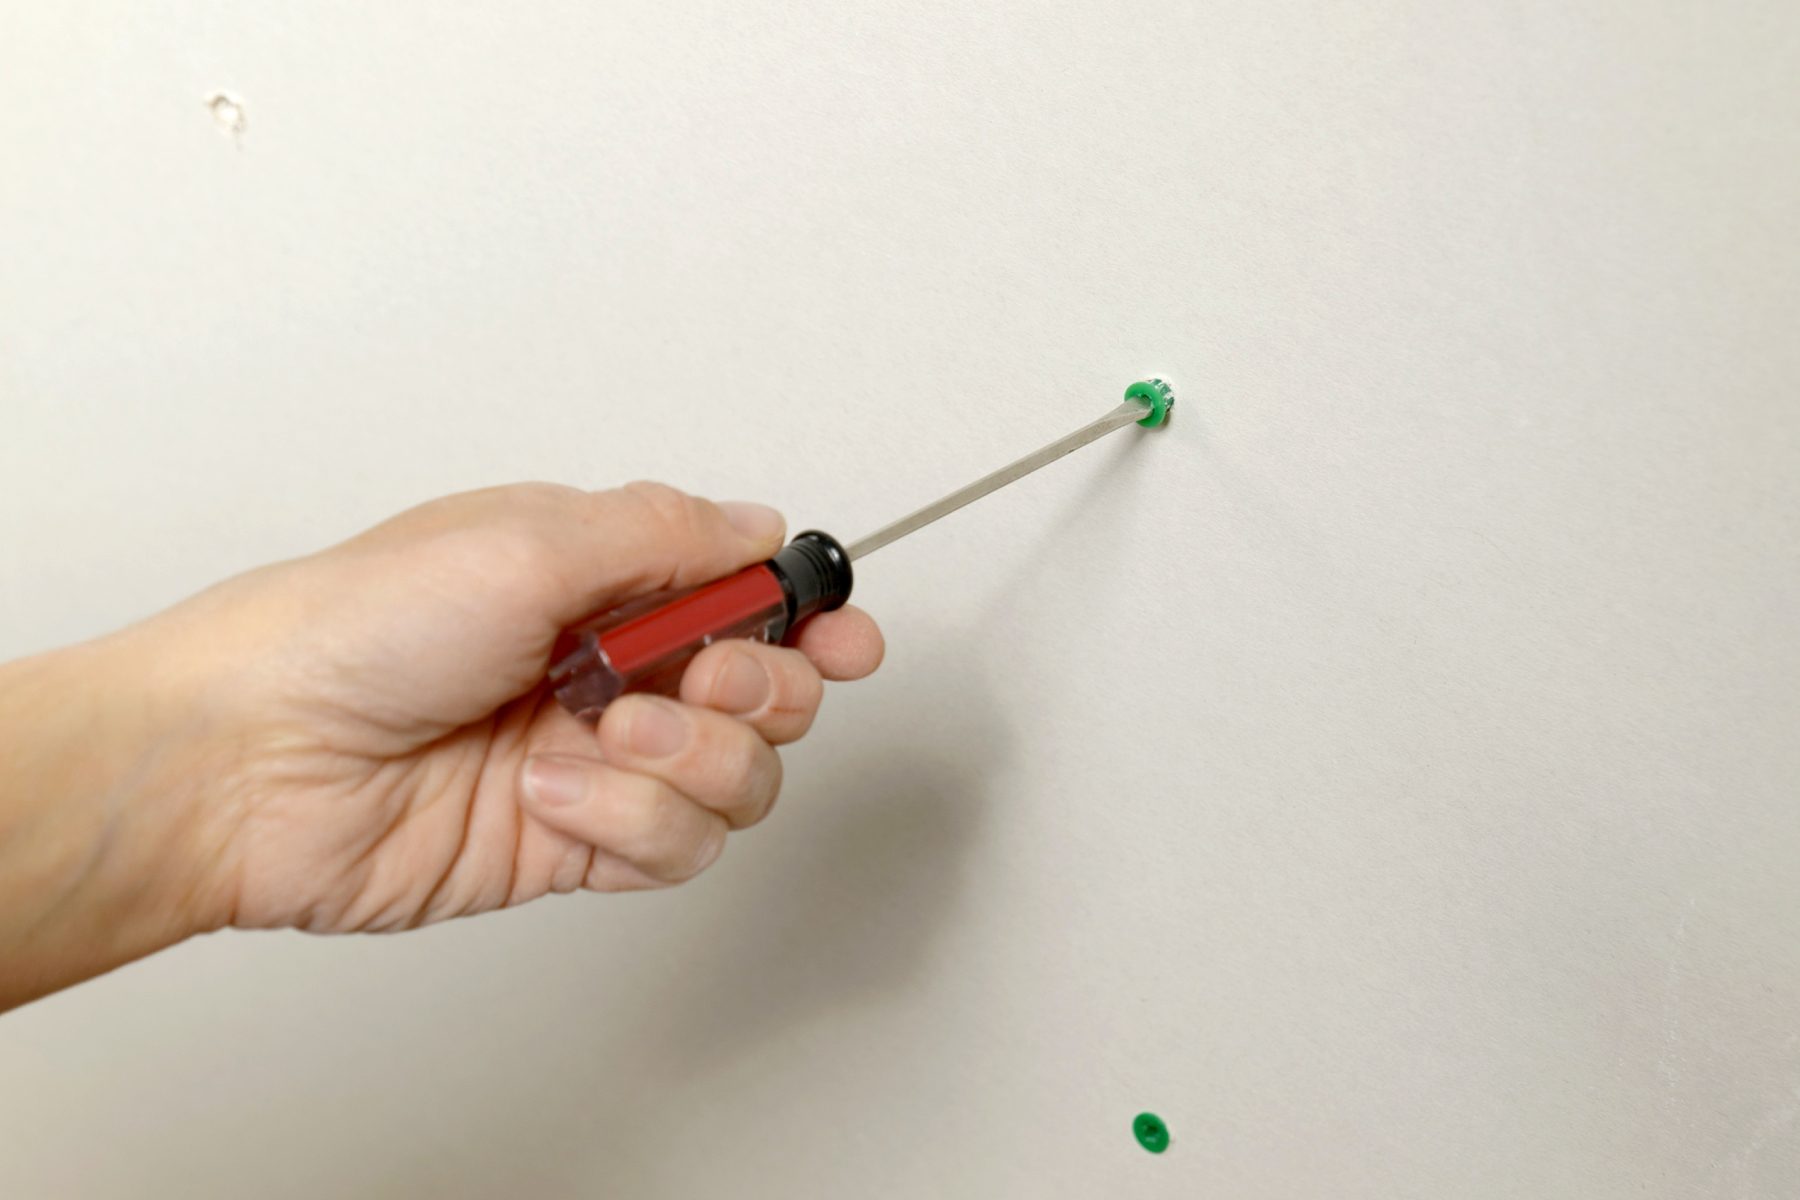 Fhmvs23 Pk 12 8 Removedrywallanchors Step2b Unscrew It With A Screwdriver